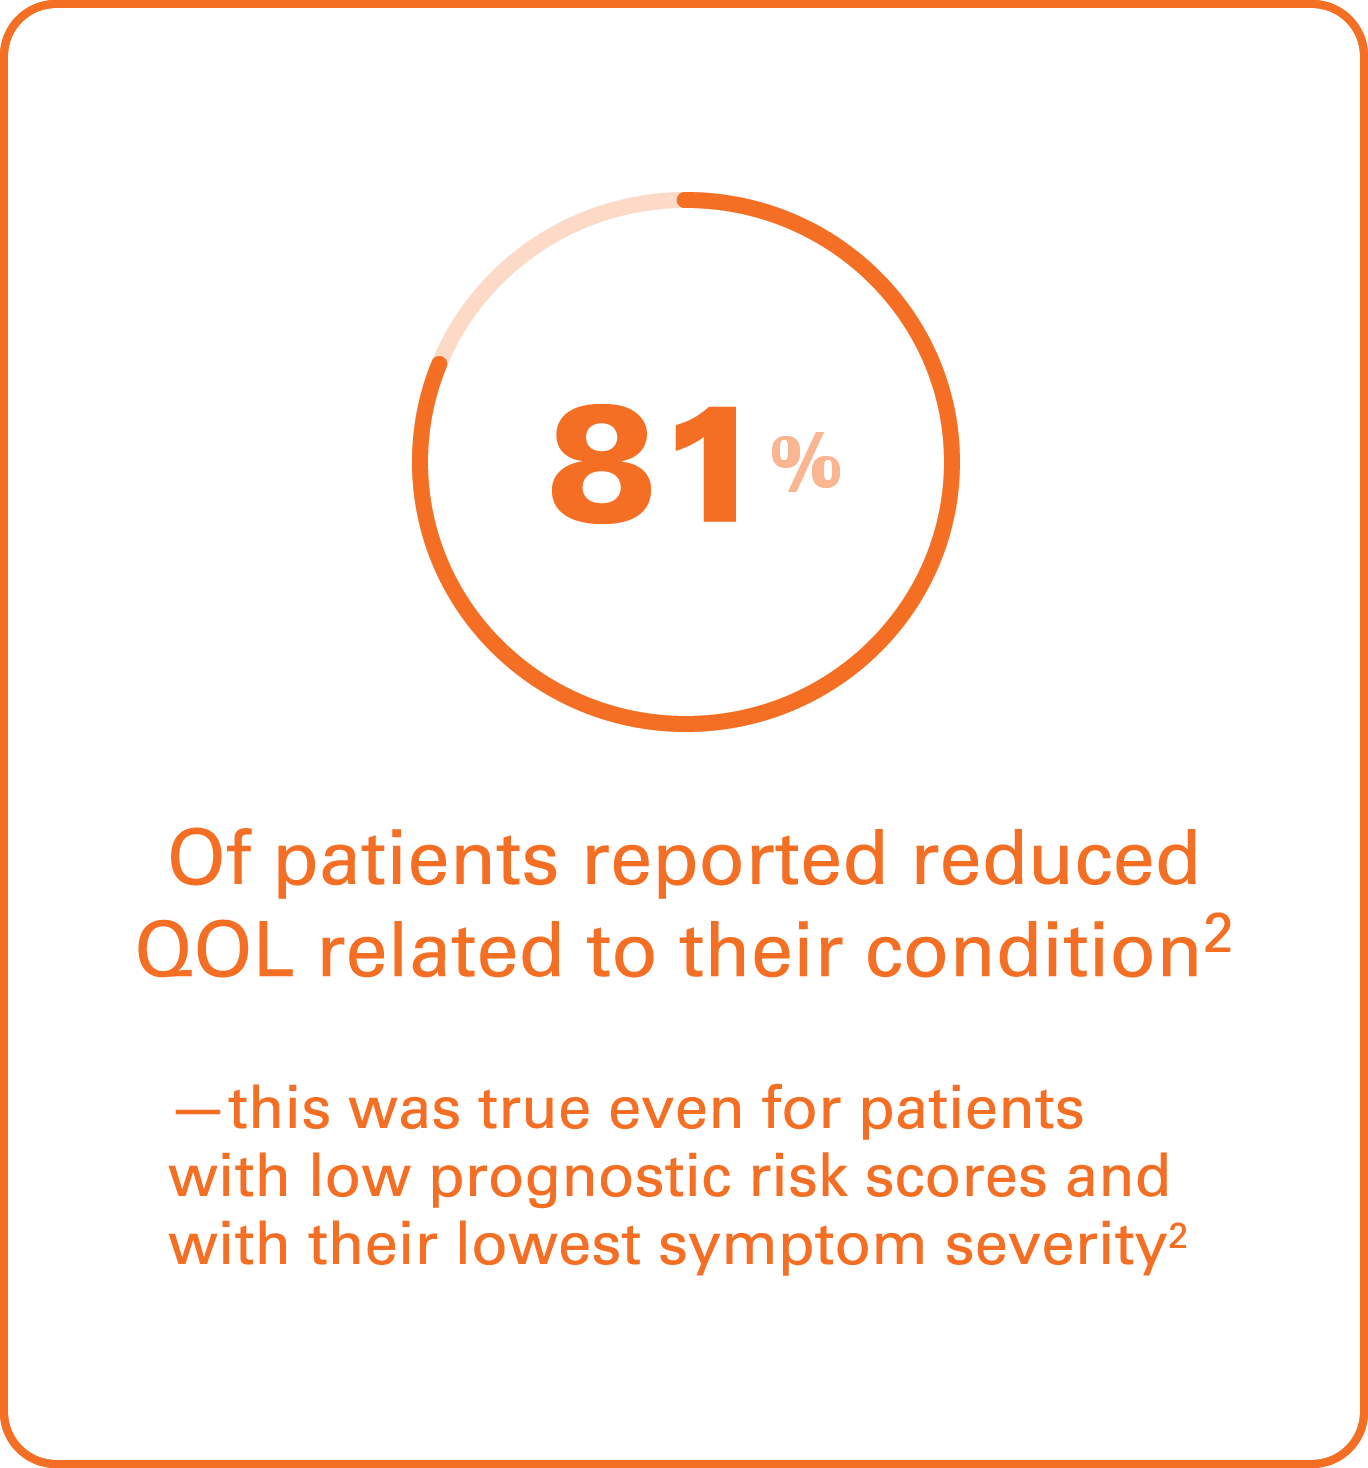 Image says 81% of patients reported reduced QOL related to their condition; this was true even for patients with low prognostic risk scores and with their lowest symptom severity